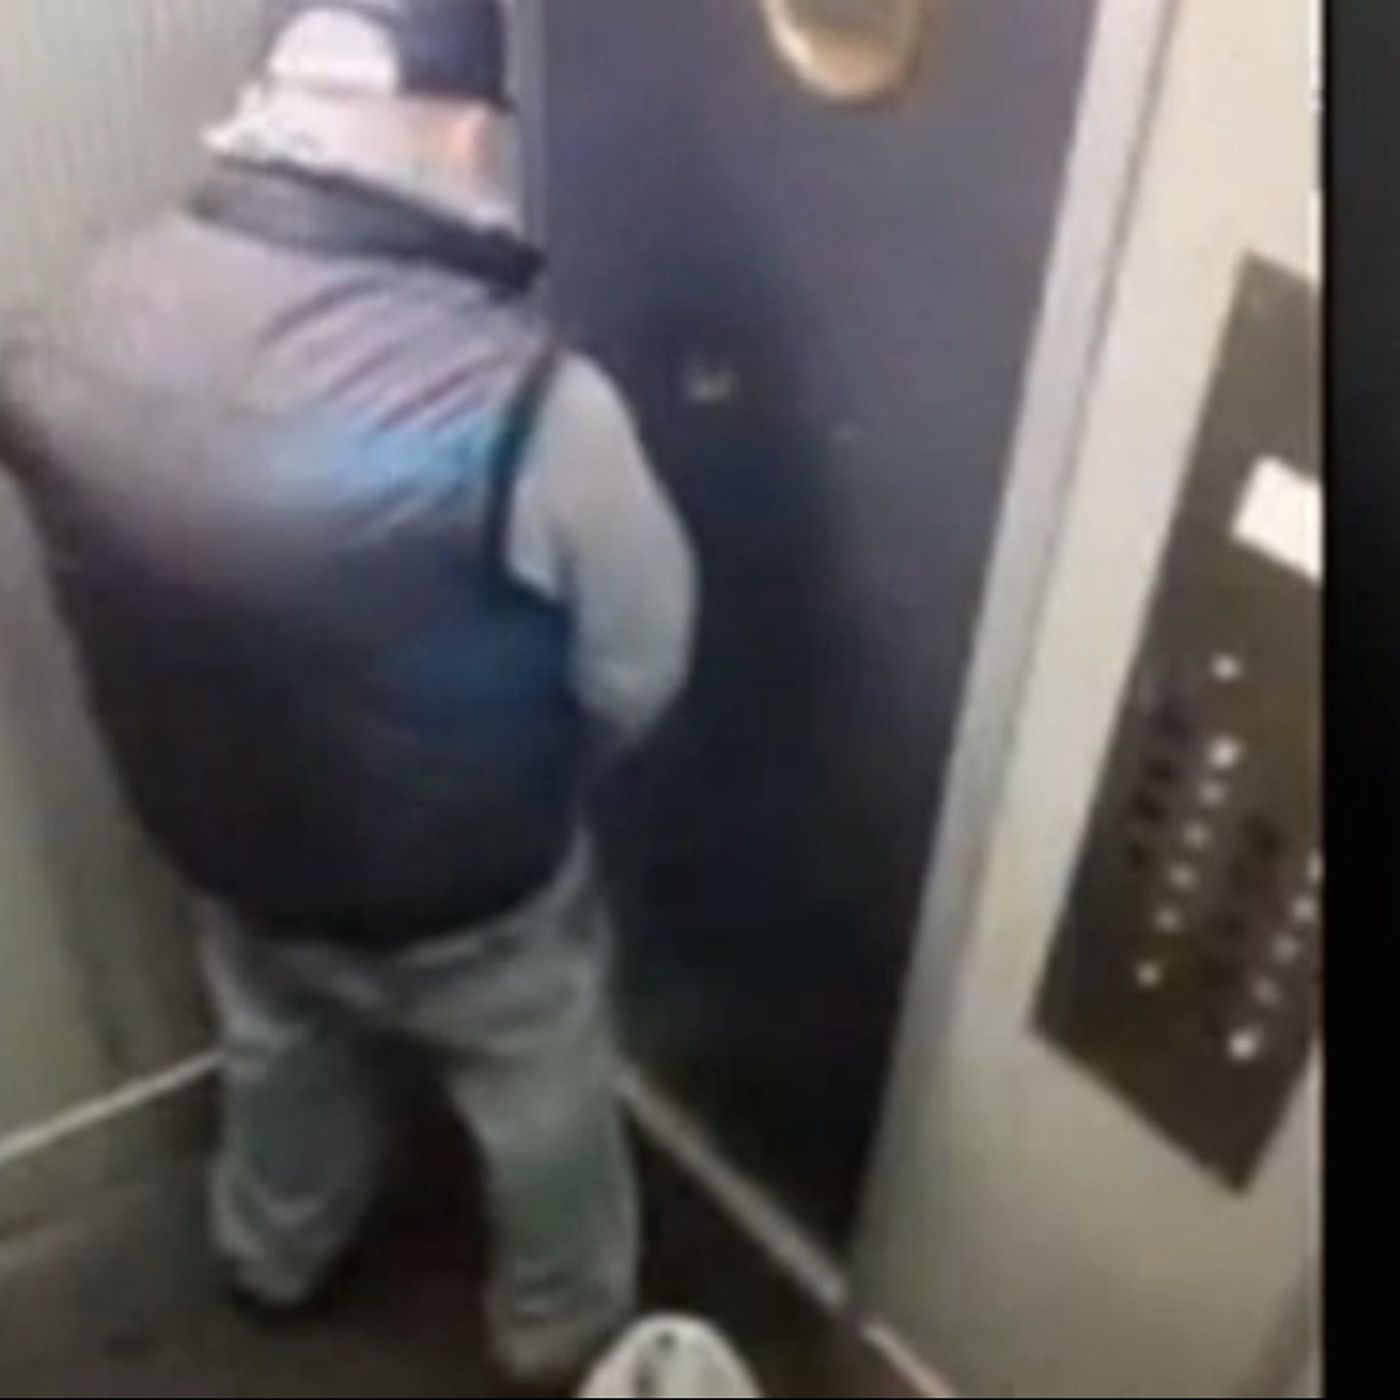 christine peckham recommends man eats wife elevator pic